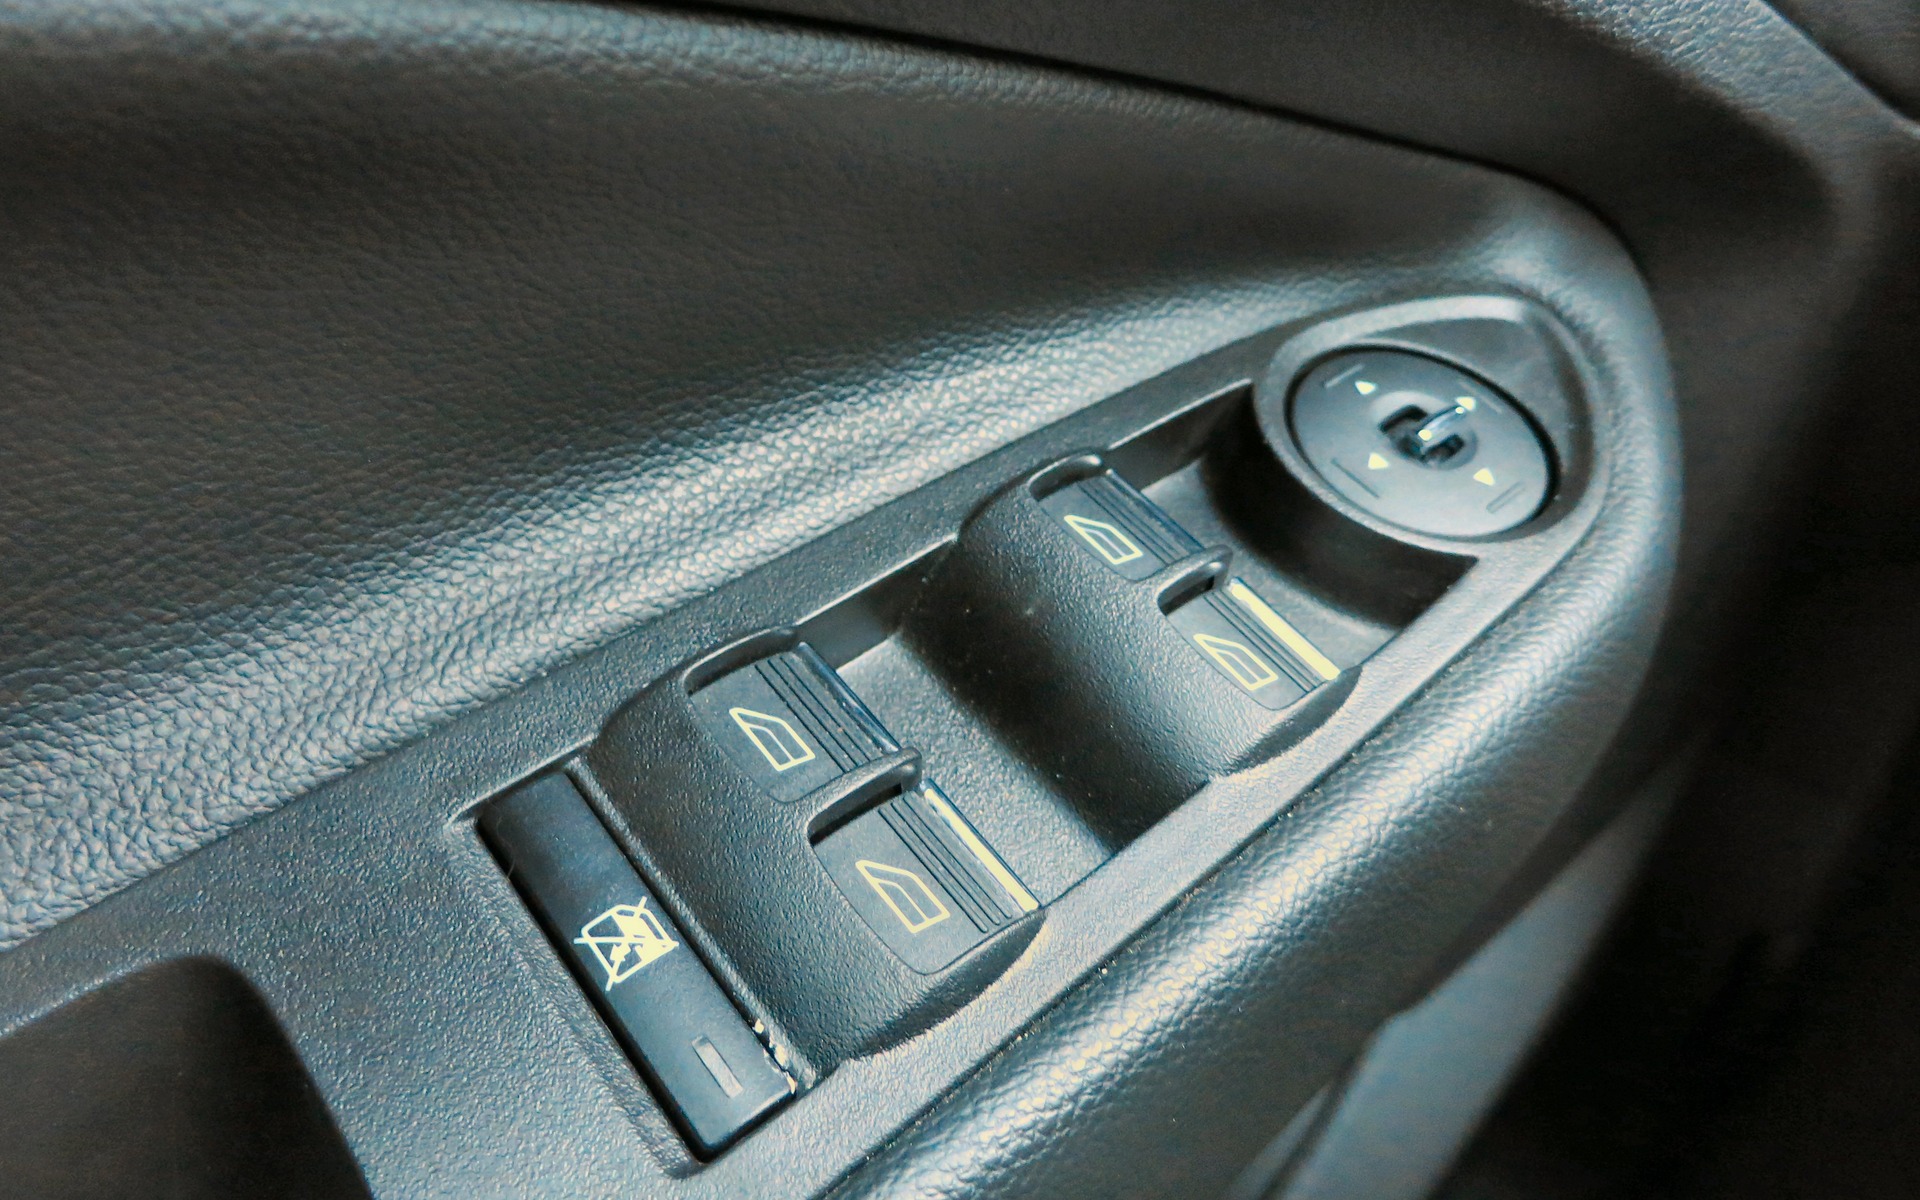 There are a lot of soft-touch materials to be found throughout the vehicle.